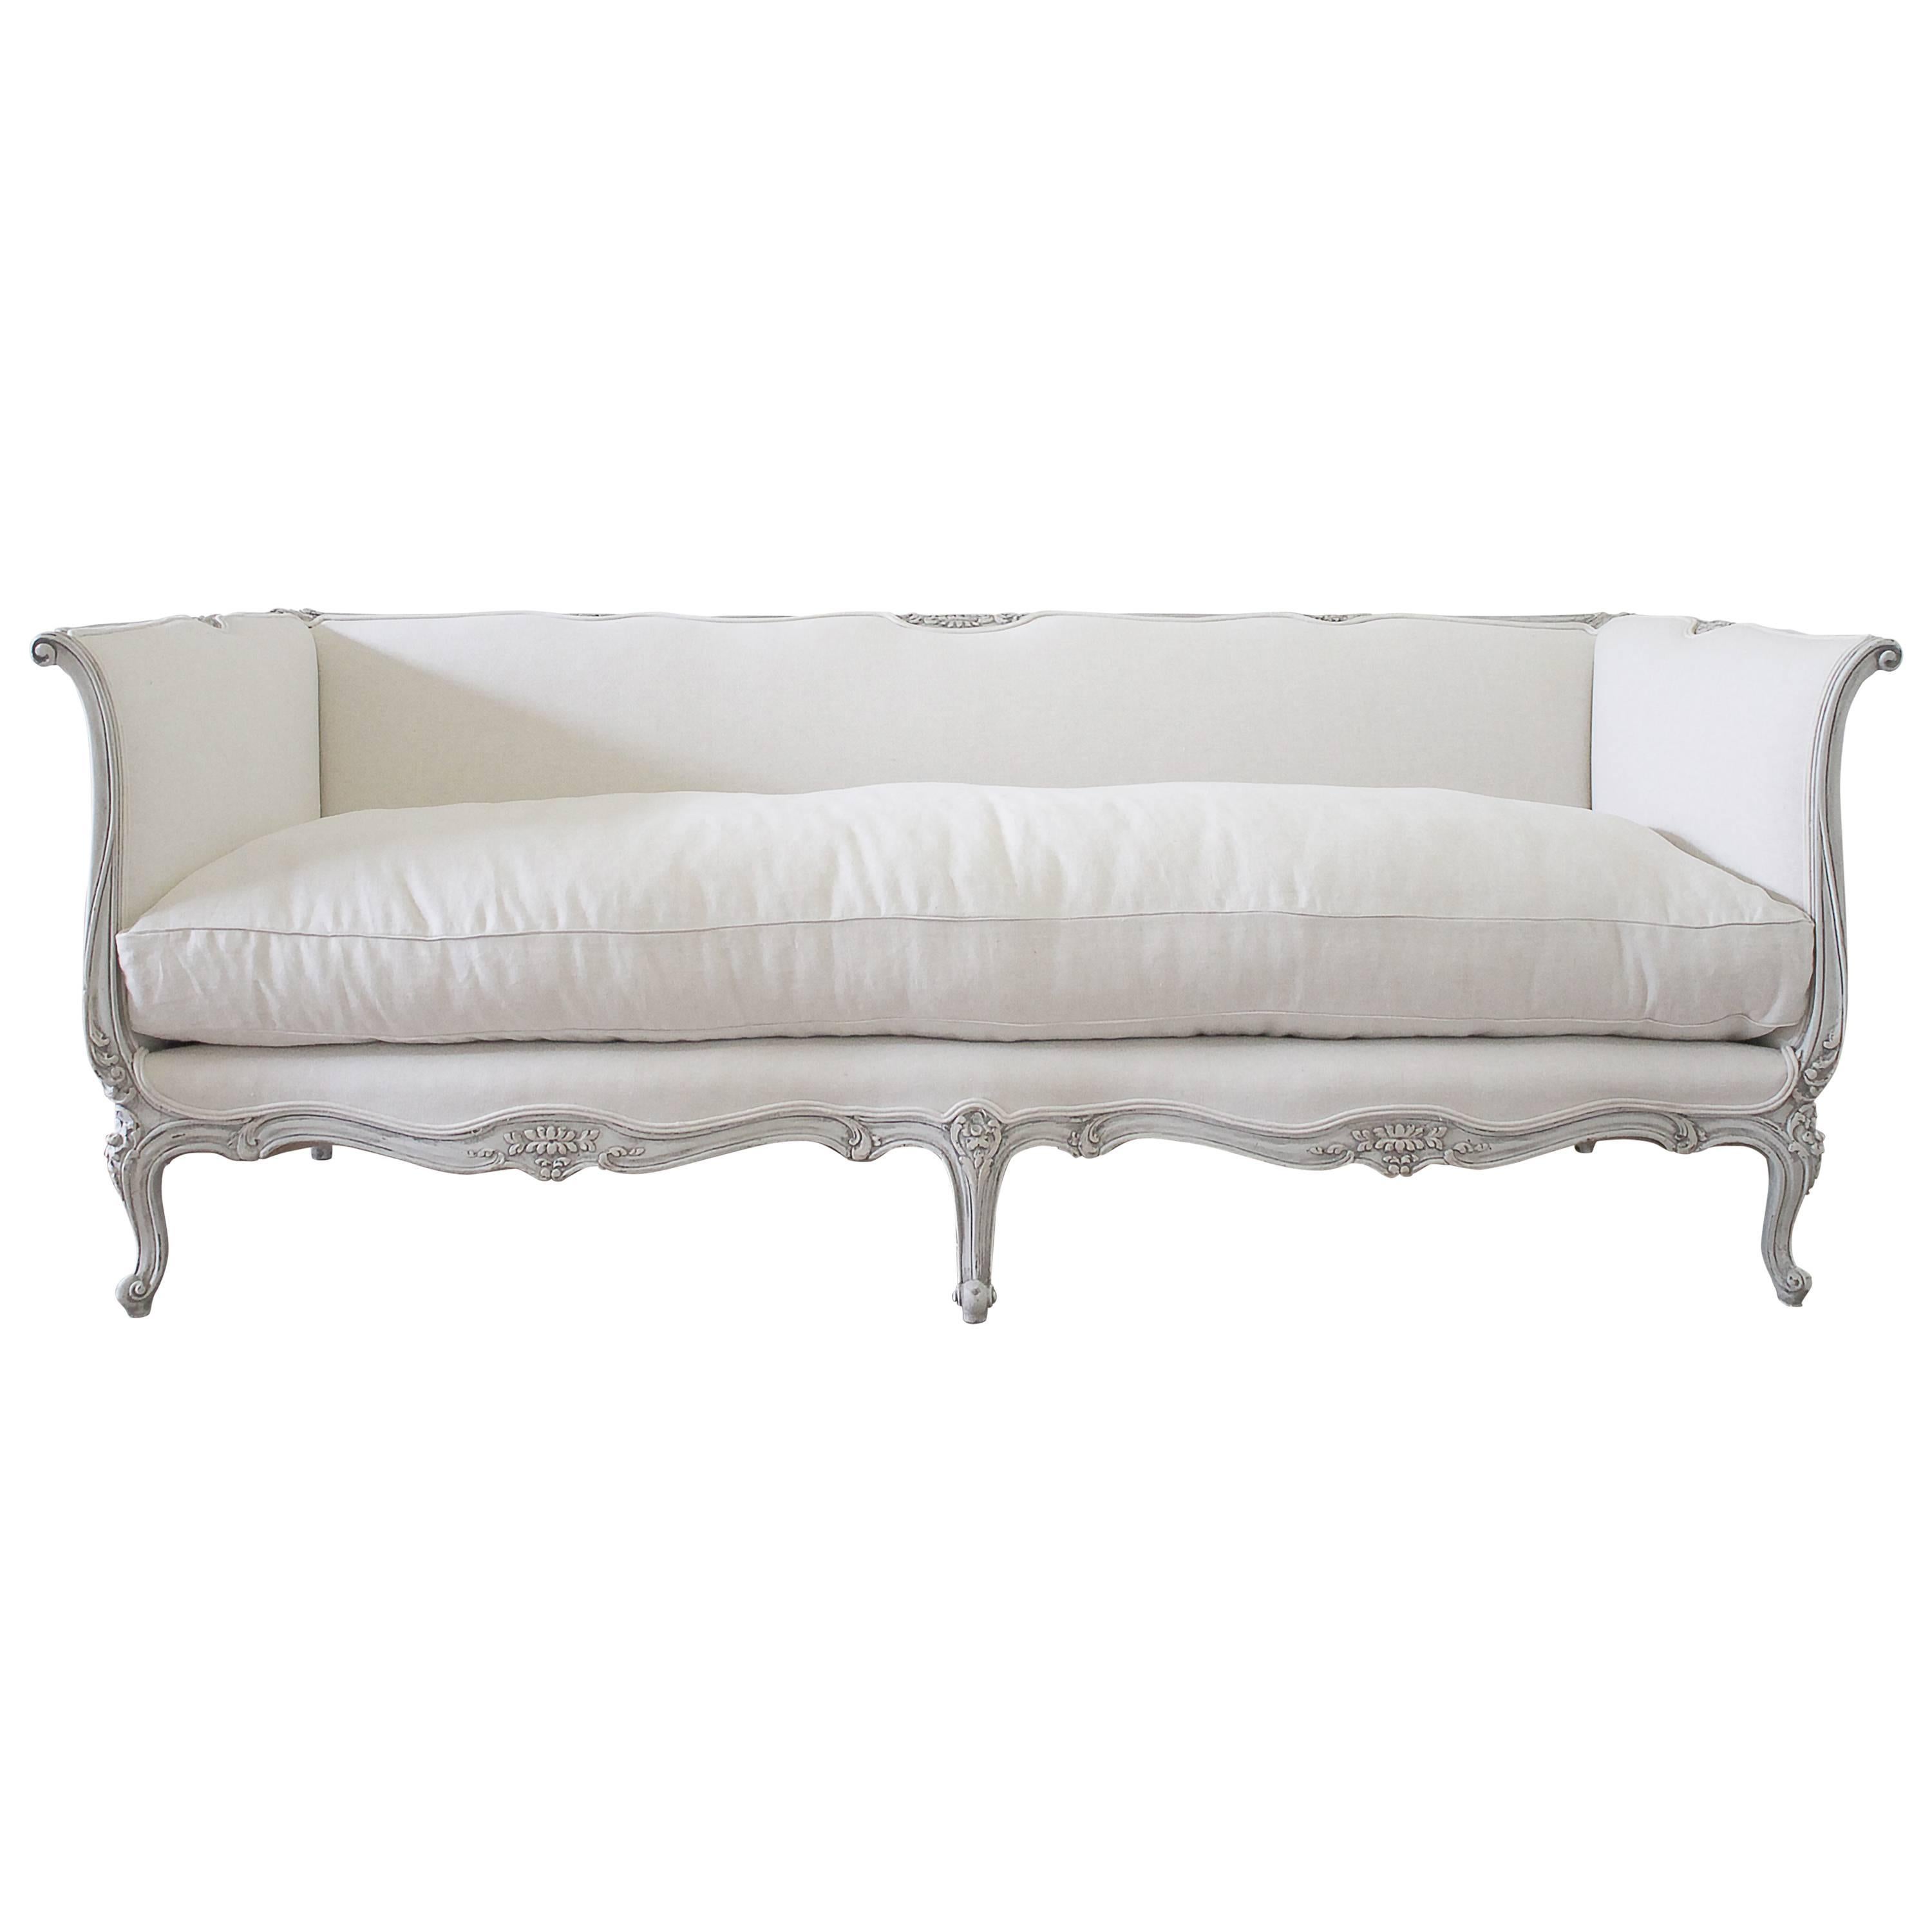 20th Century French Louis XV Daybed Style Sofa Upholstered in Belgian Linen